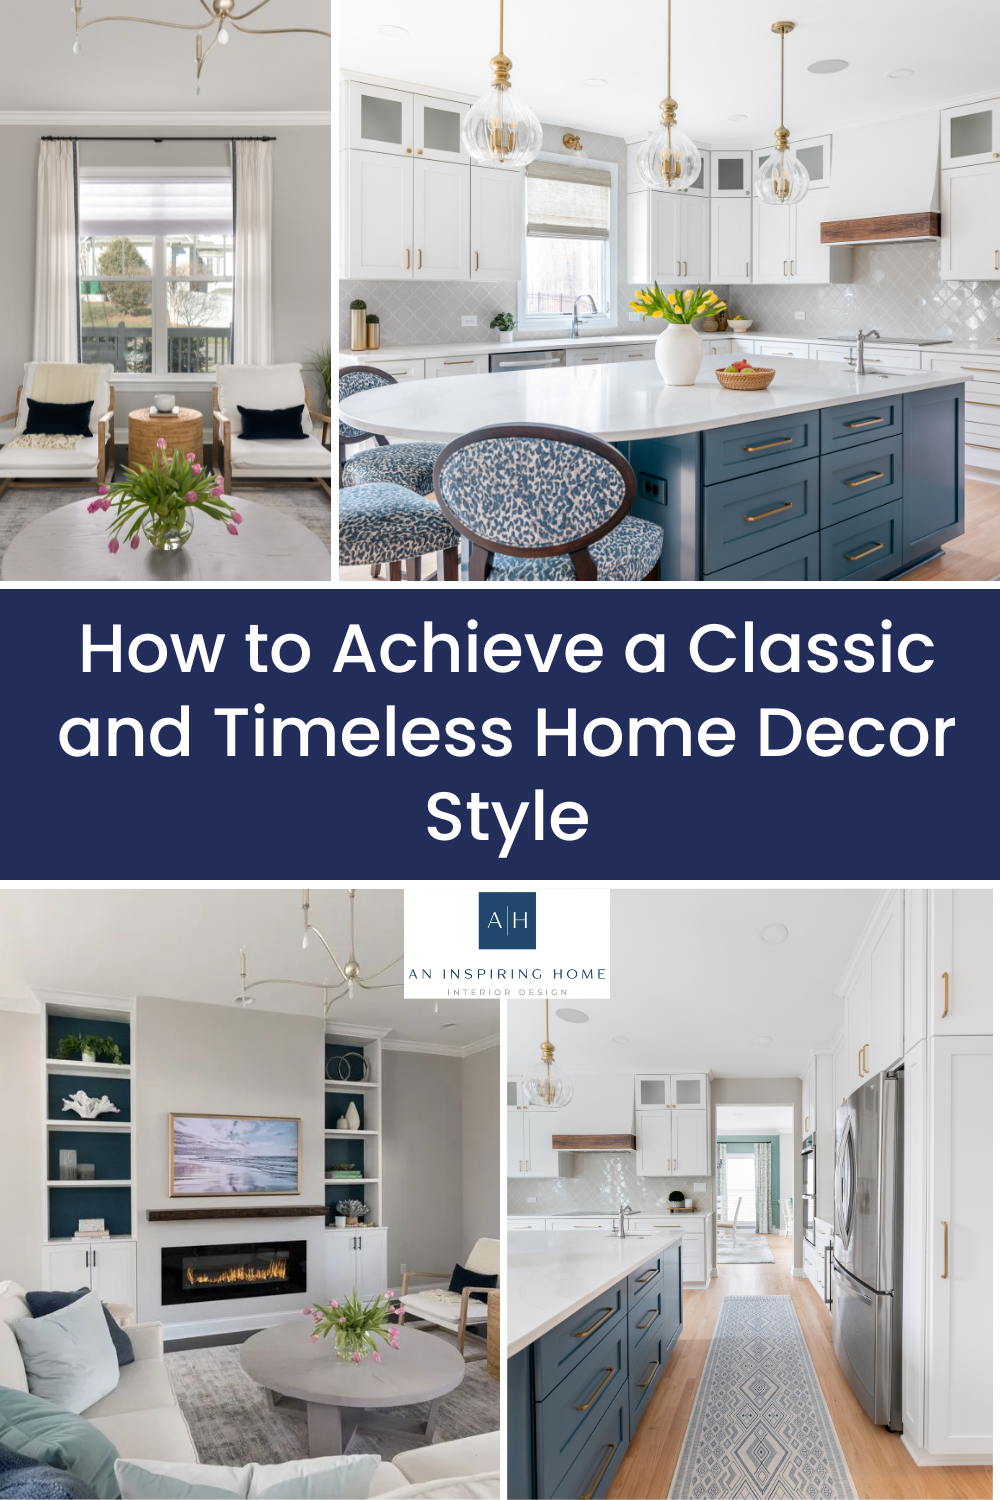 How to Achieve a Classic and Timeless Home Decor Style